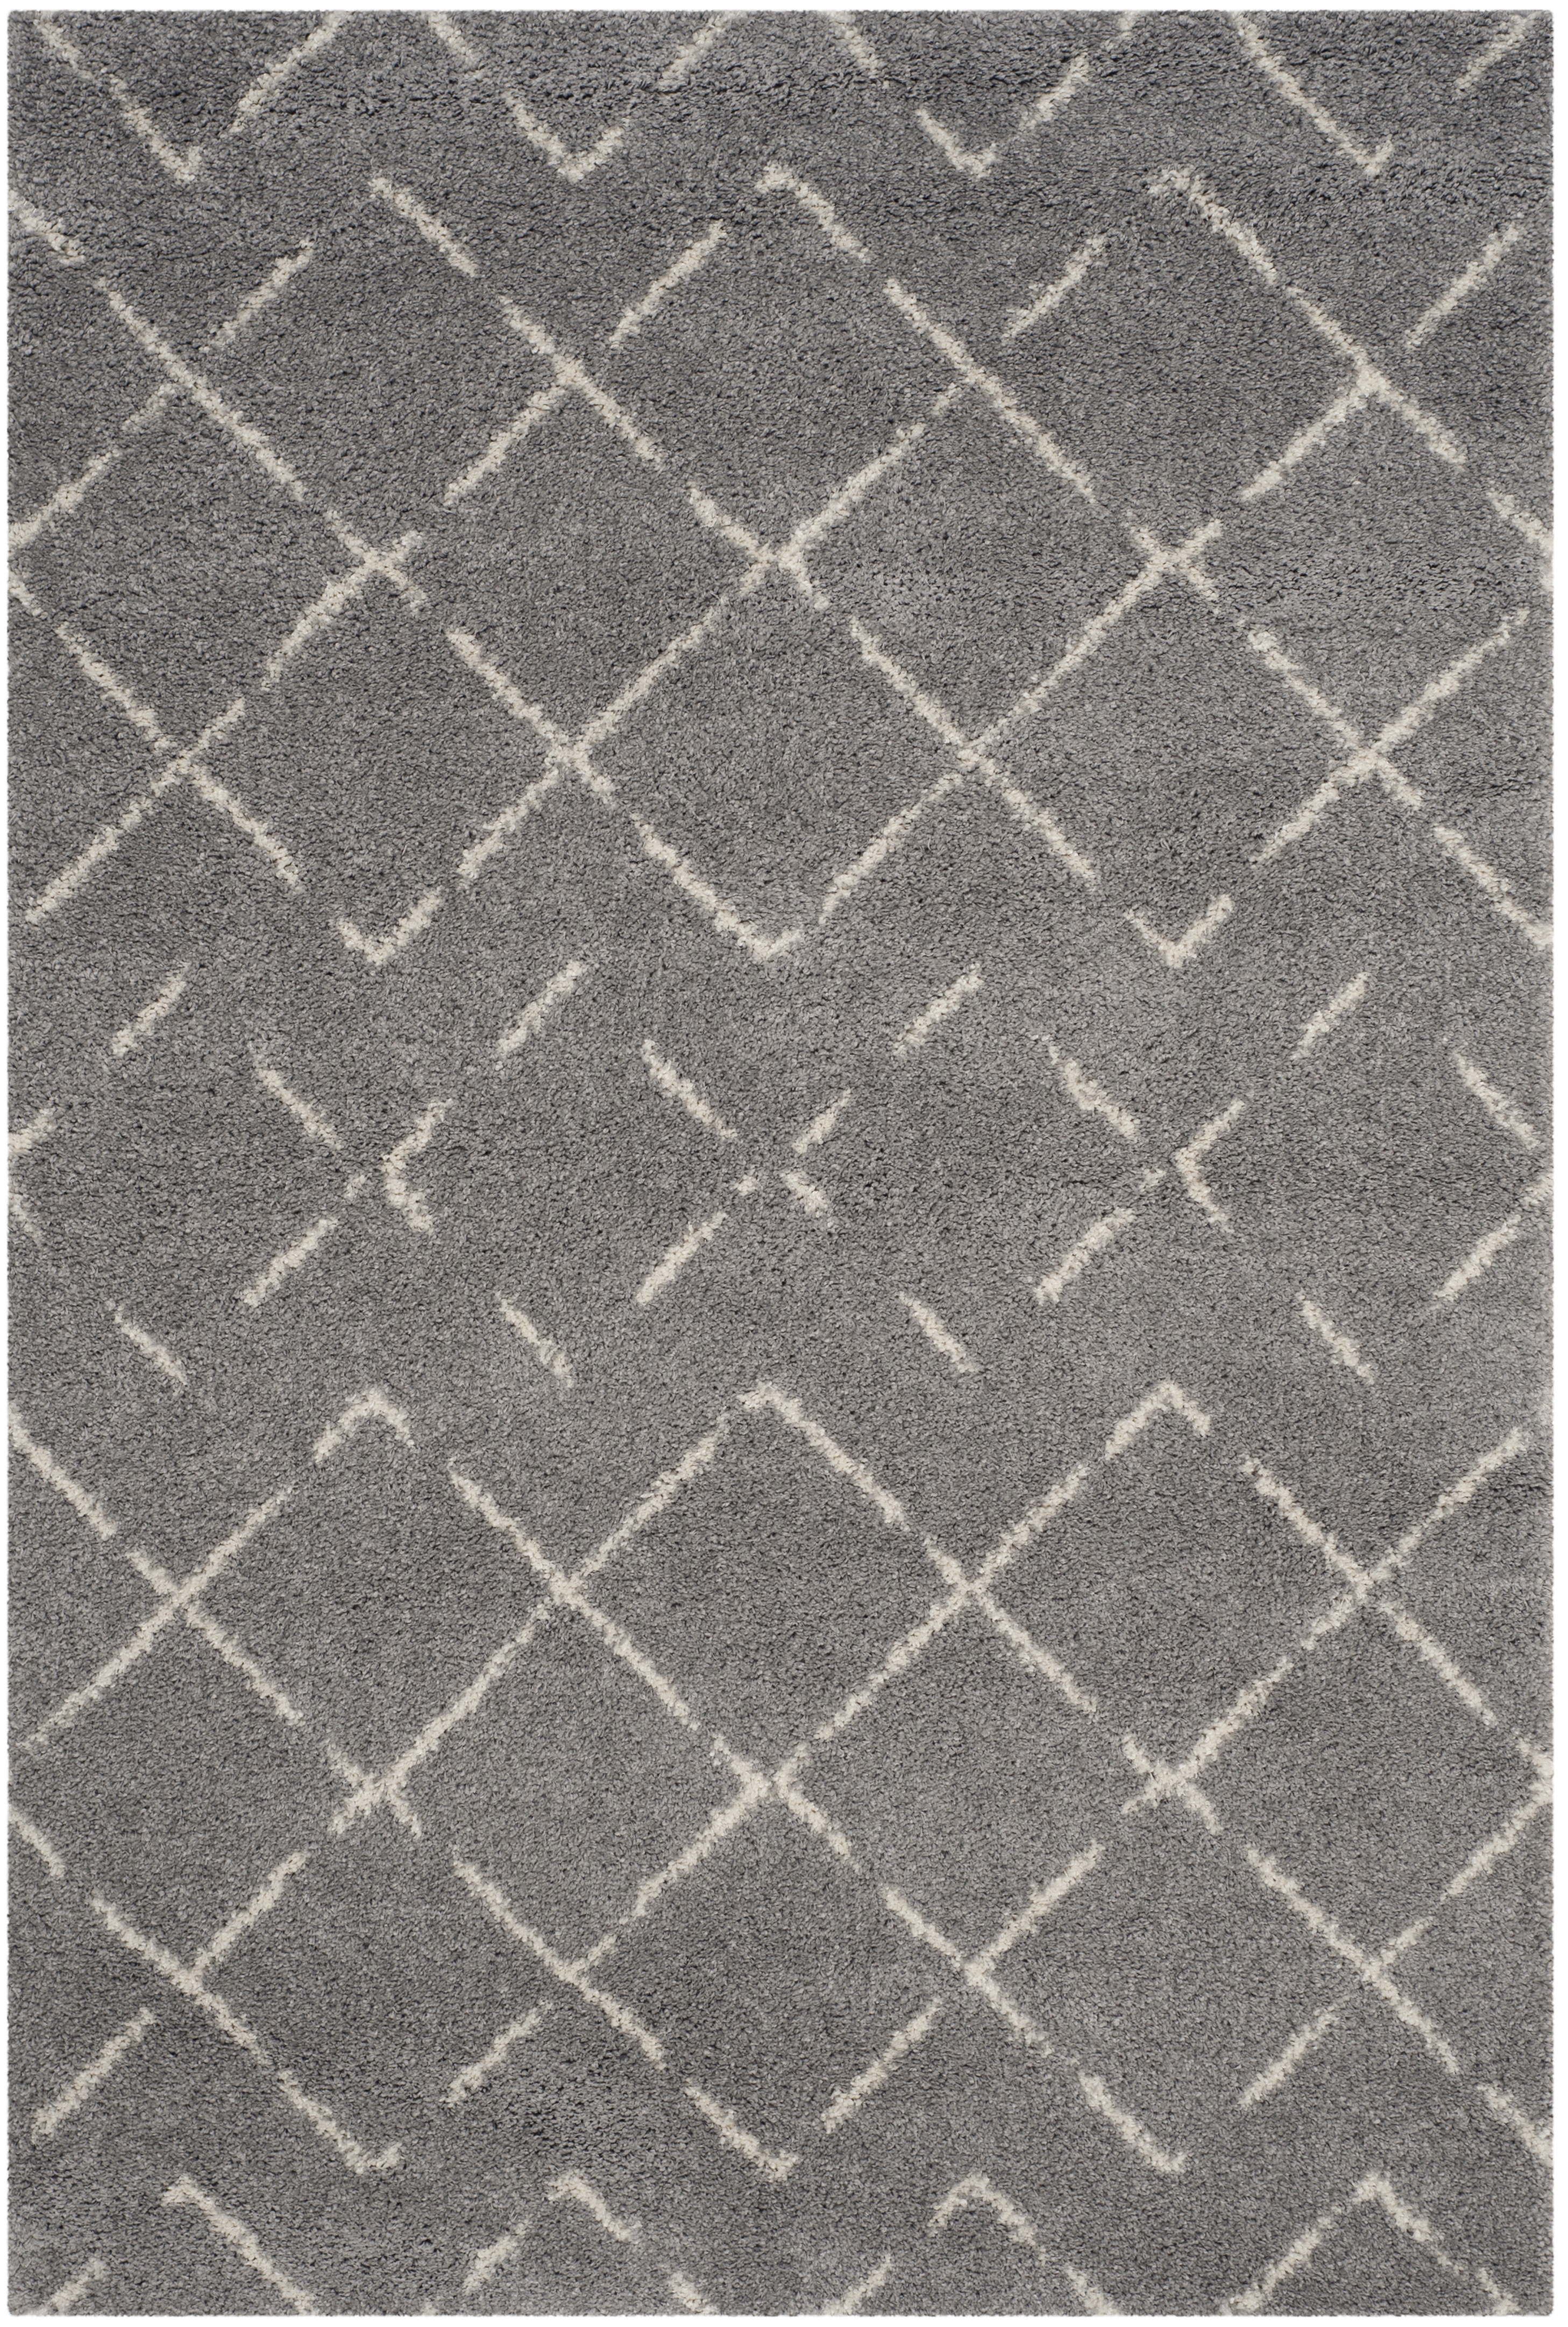 Arlo Home Woven Area Rug, ASG743D, Grey/Ivory,  10' X 14' - Image 0